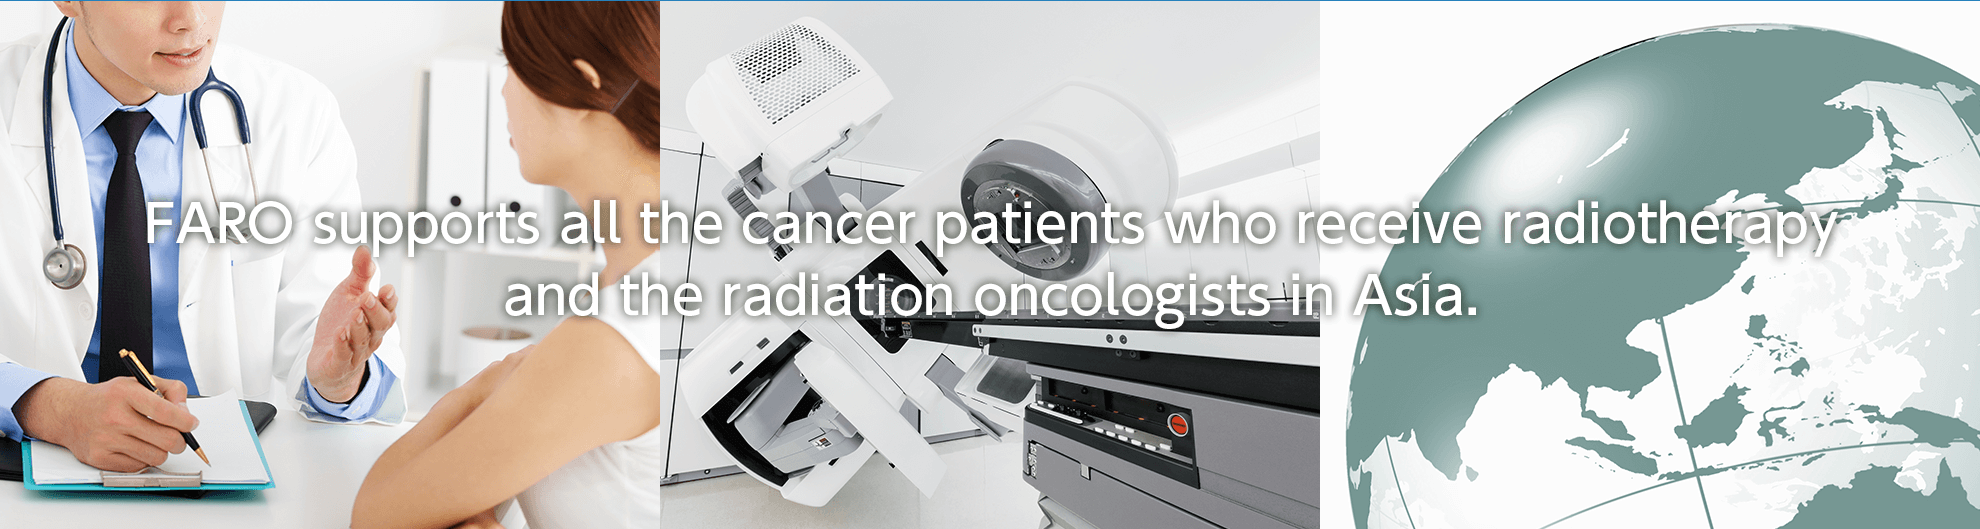 FARO supports all radiation oncologists especially those in Asia region in their daily practice.